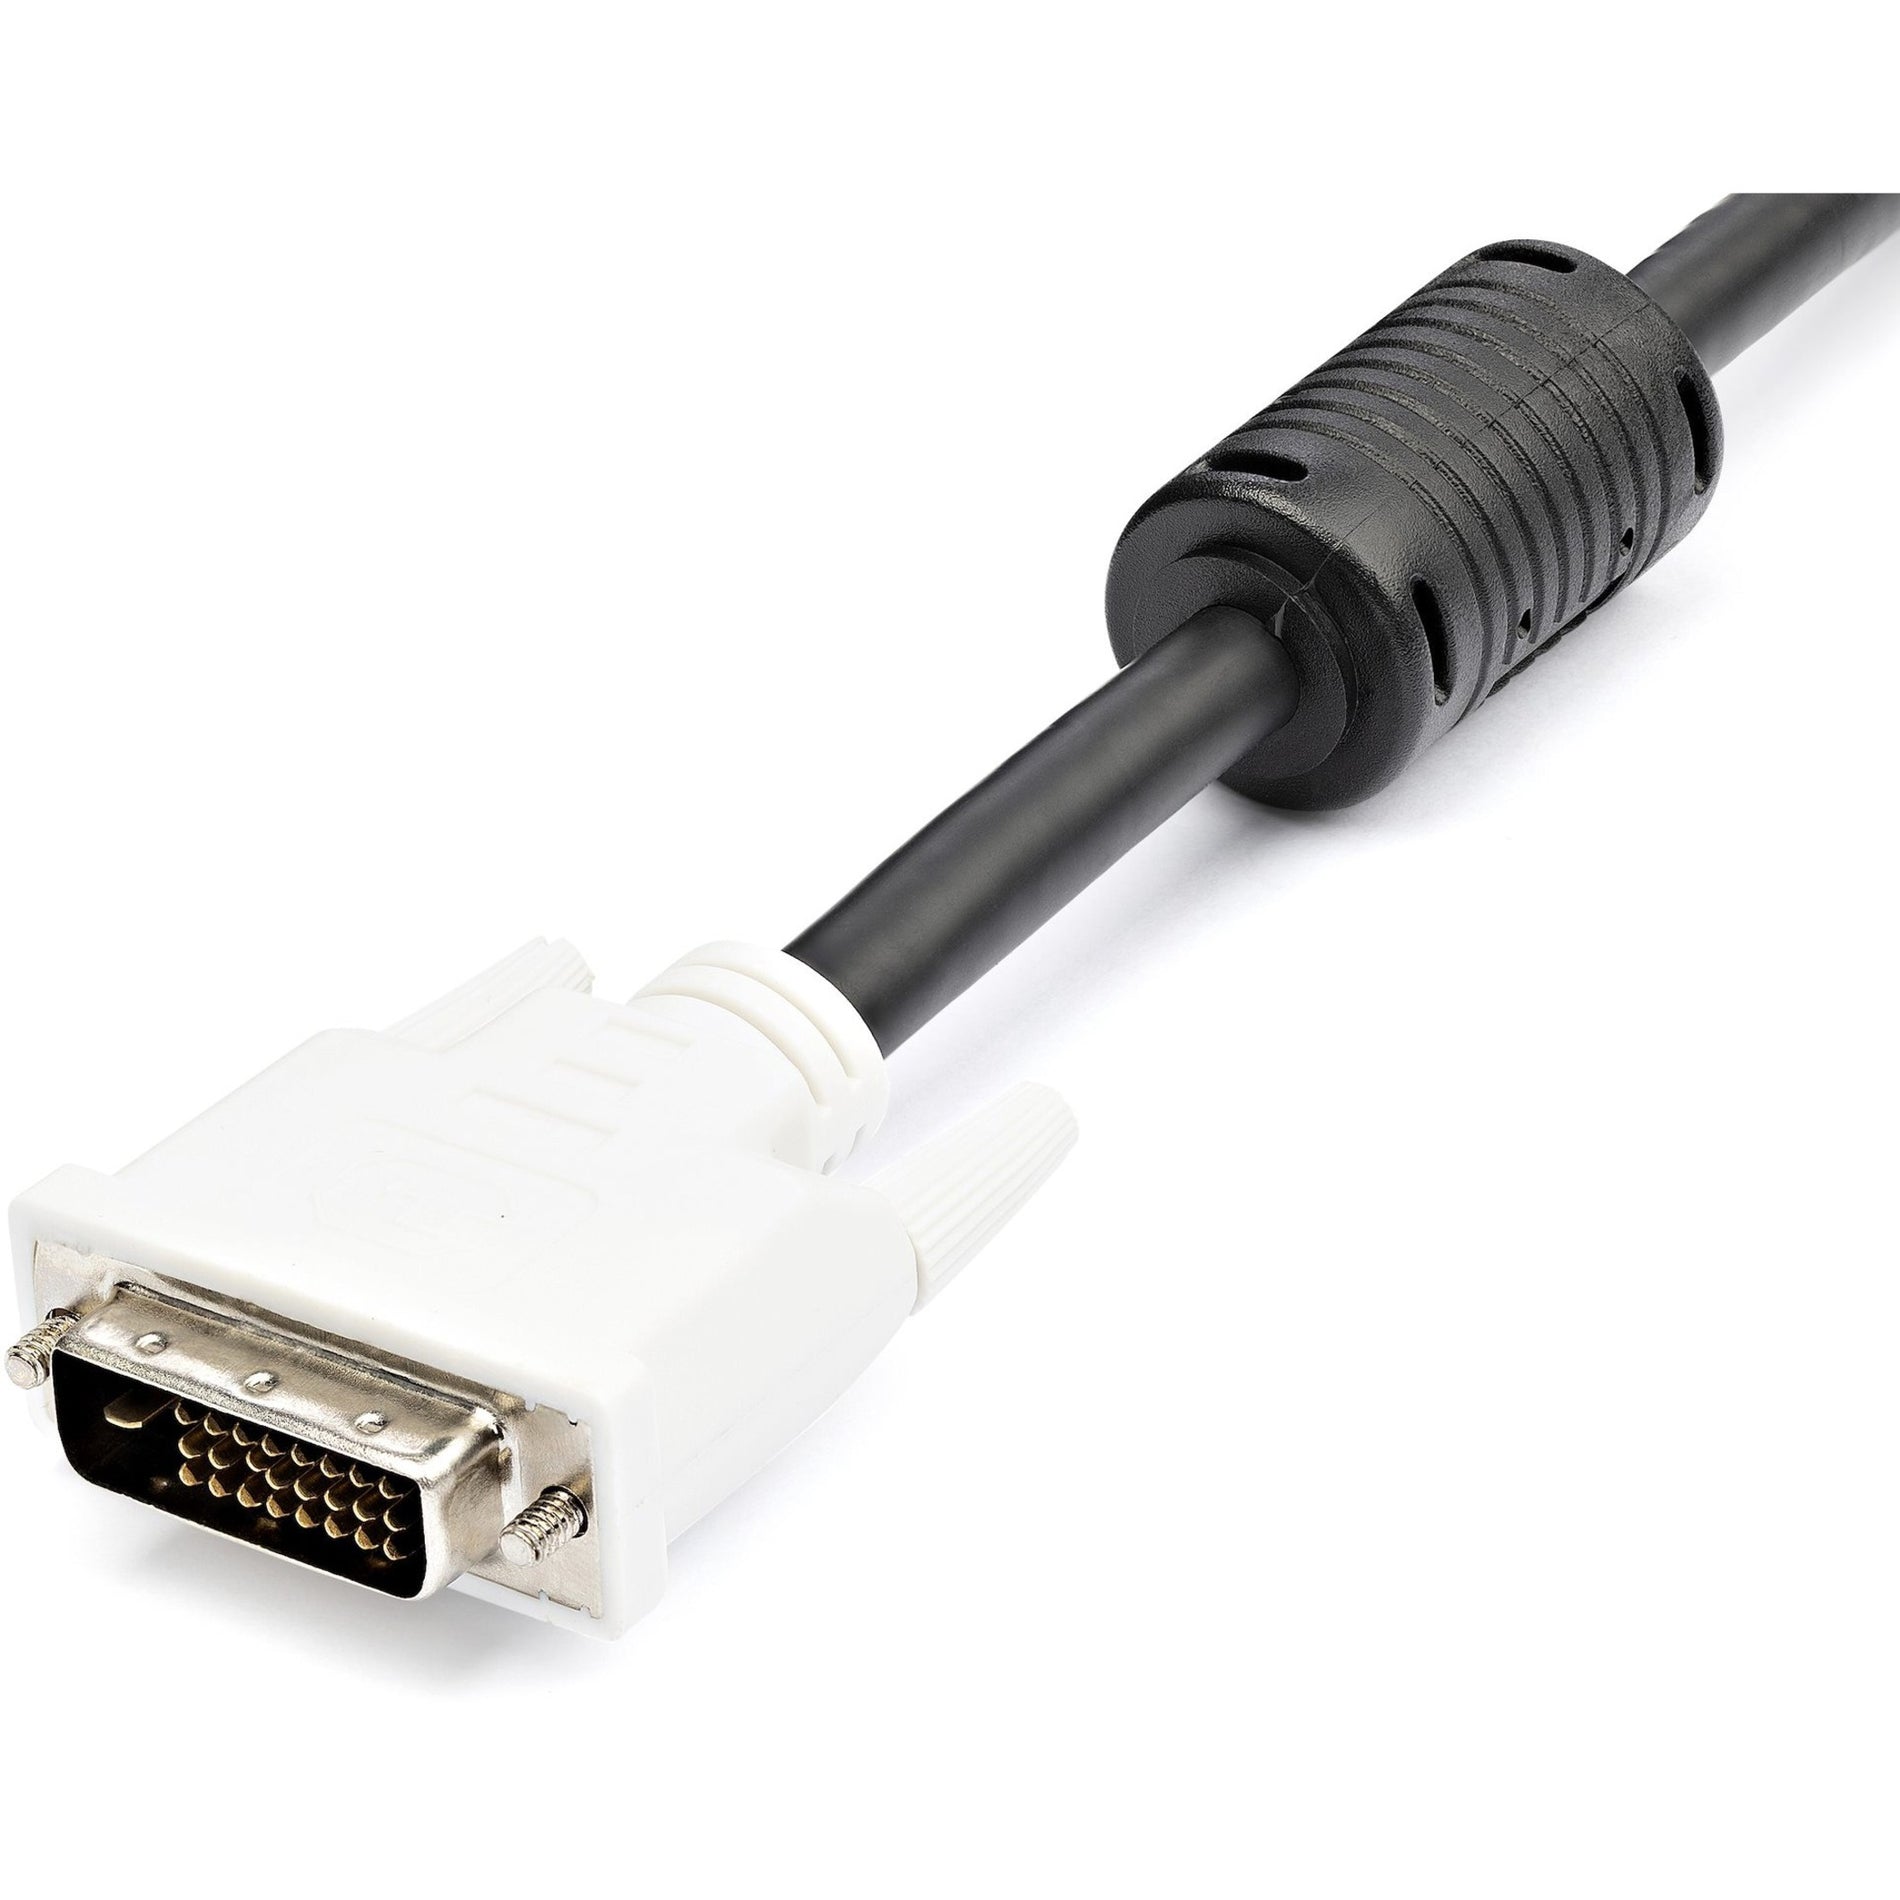 StarTech.com DVIDDMM3 3 ft DVI-D Dual Link Cable - M/M, High-Speed Video Cable for Notebooks, Monitors, and More